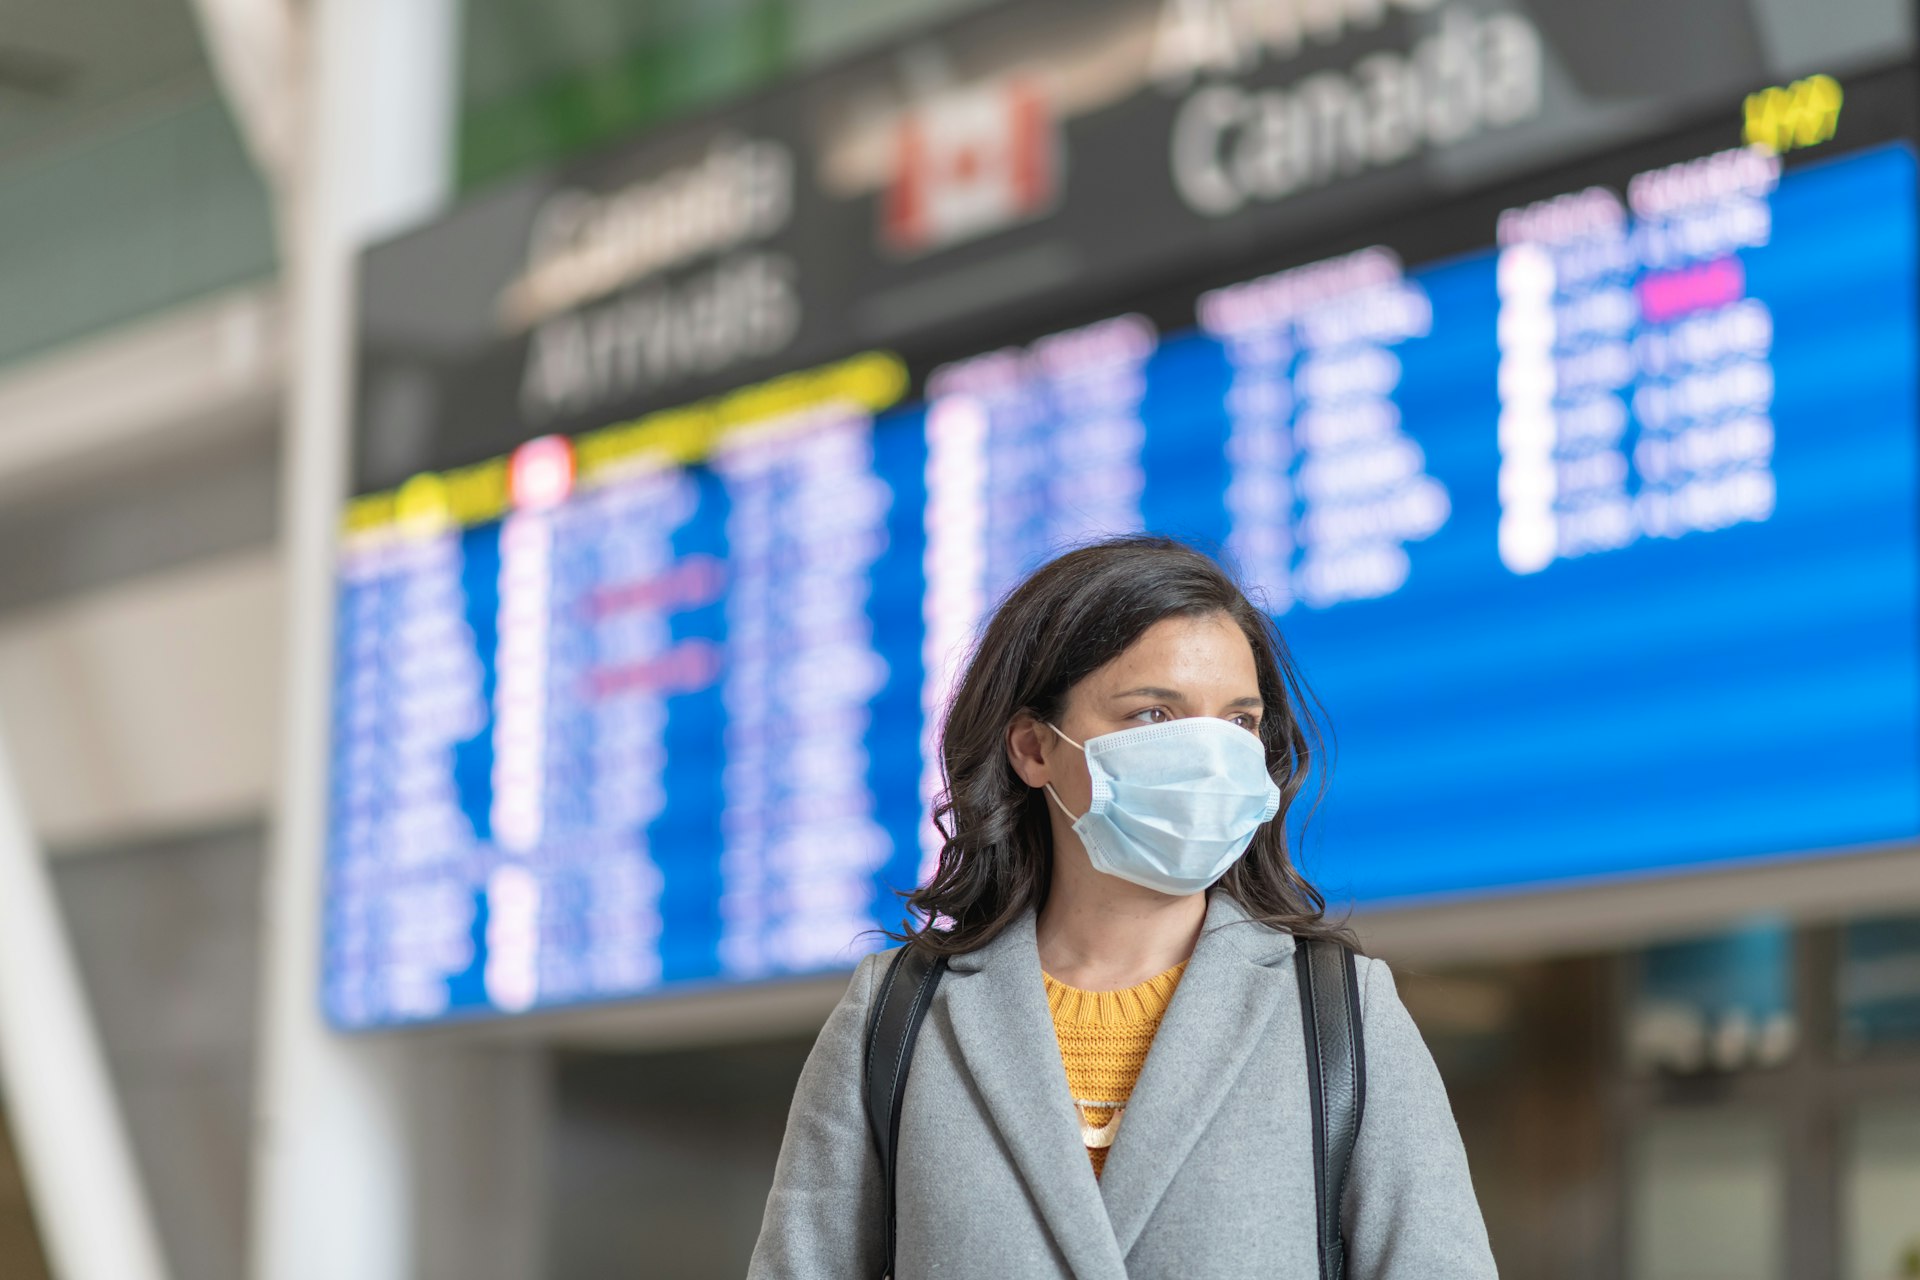 A solo travellers flight has been cancelled. She is standing in front of the departures board. She is wearing a protective face mask